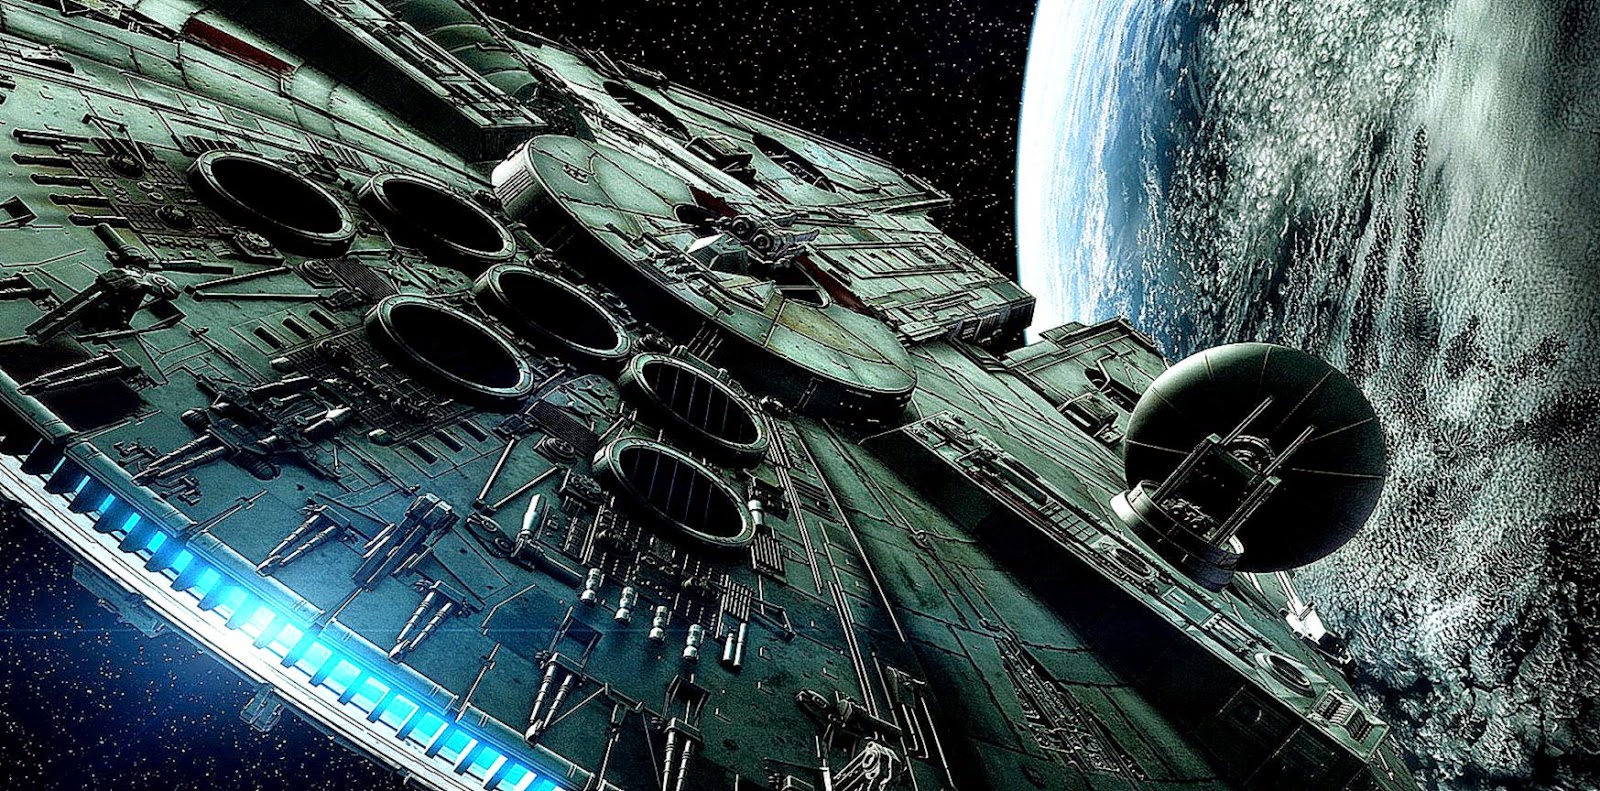 millenium falcon wallpaper,space station,spacecraft,outer space,space,cg artwork